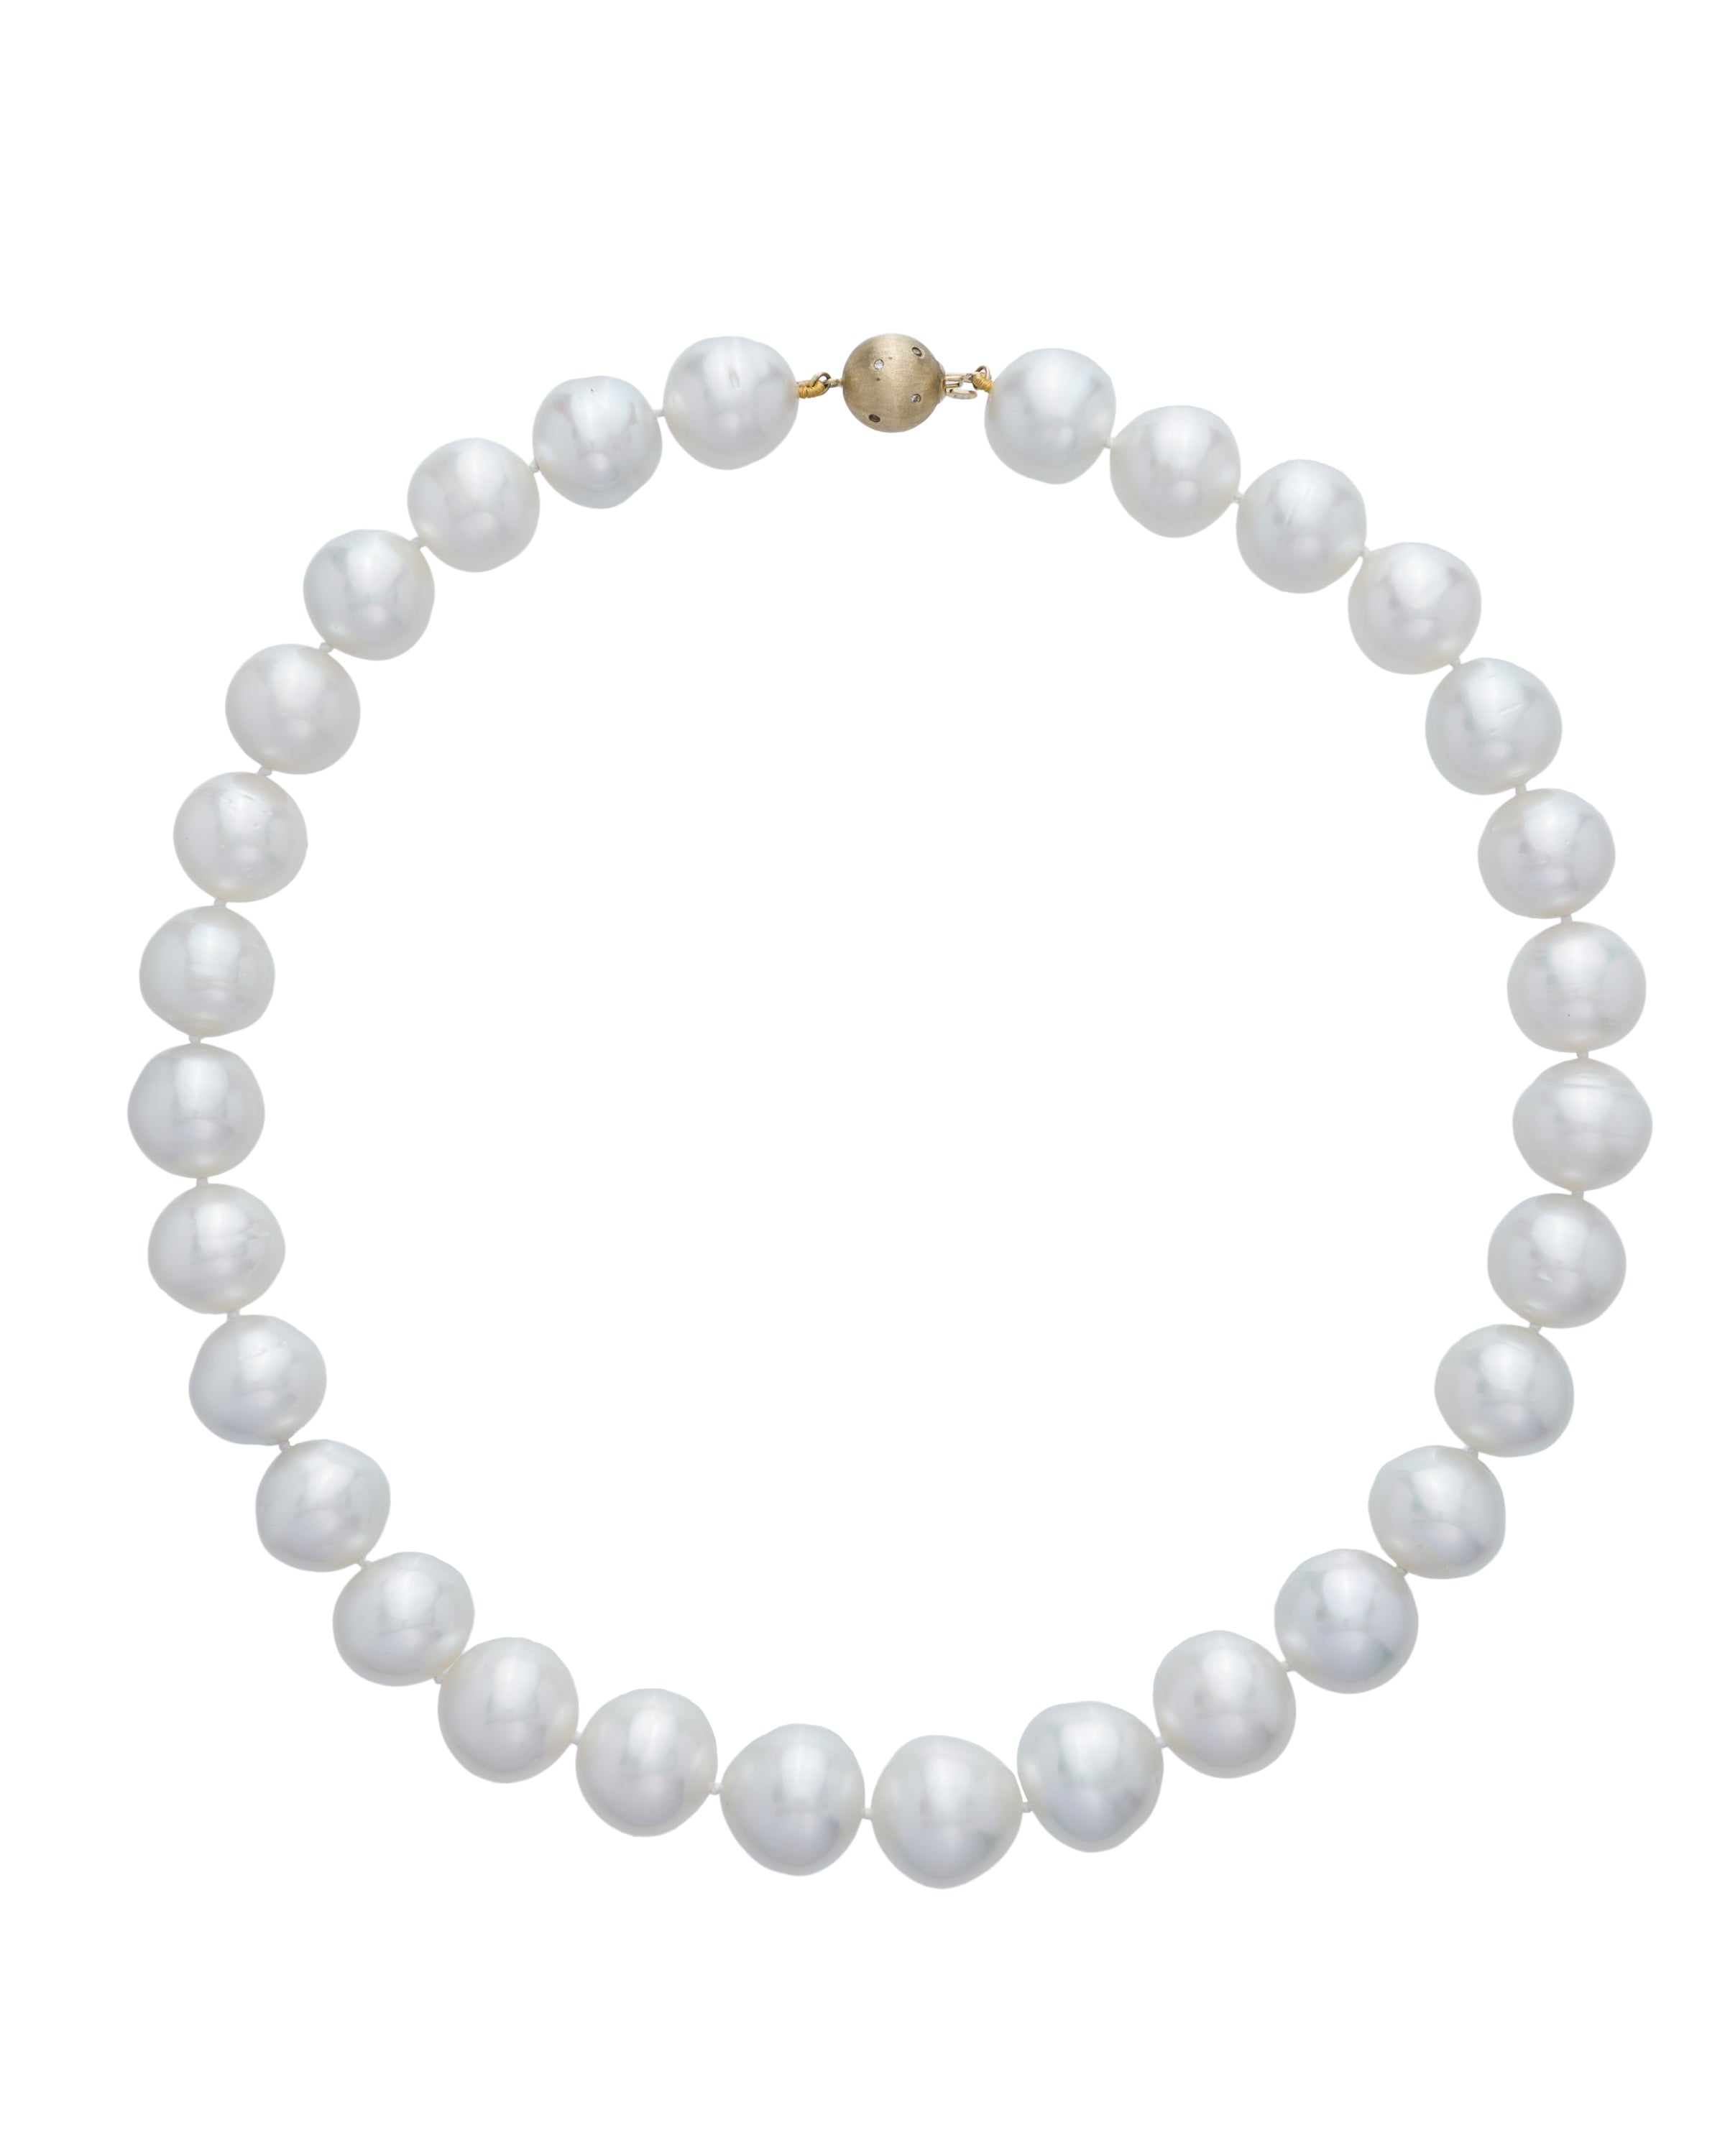 Australian South Sea pearl strand featuring a diamond set clasp, crafted in 18 karat yellow gold.